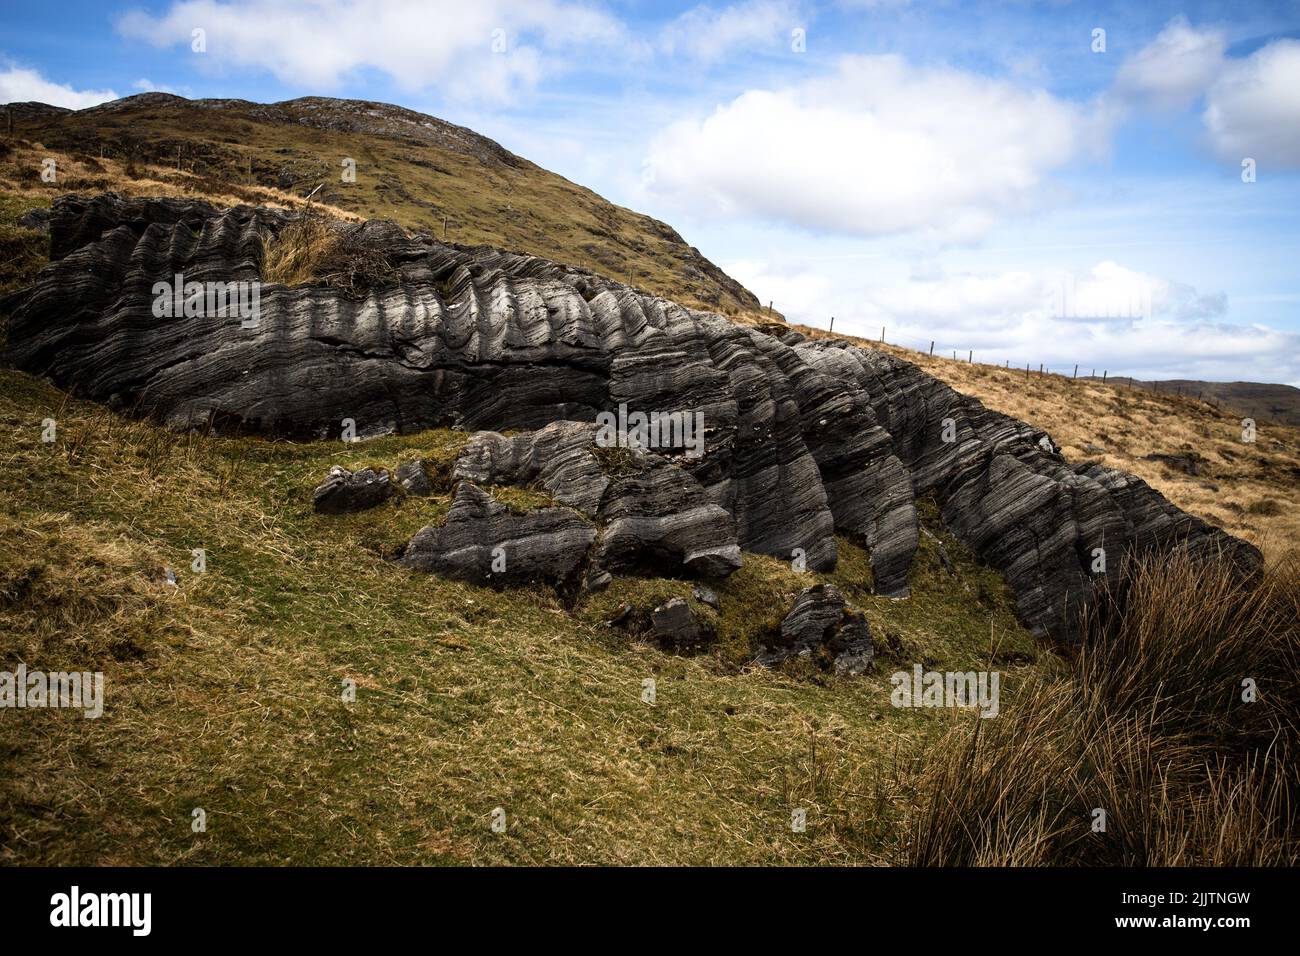 An abstract rock formation on the slope of a hill Stock Photo